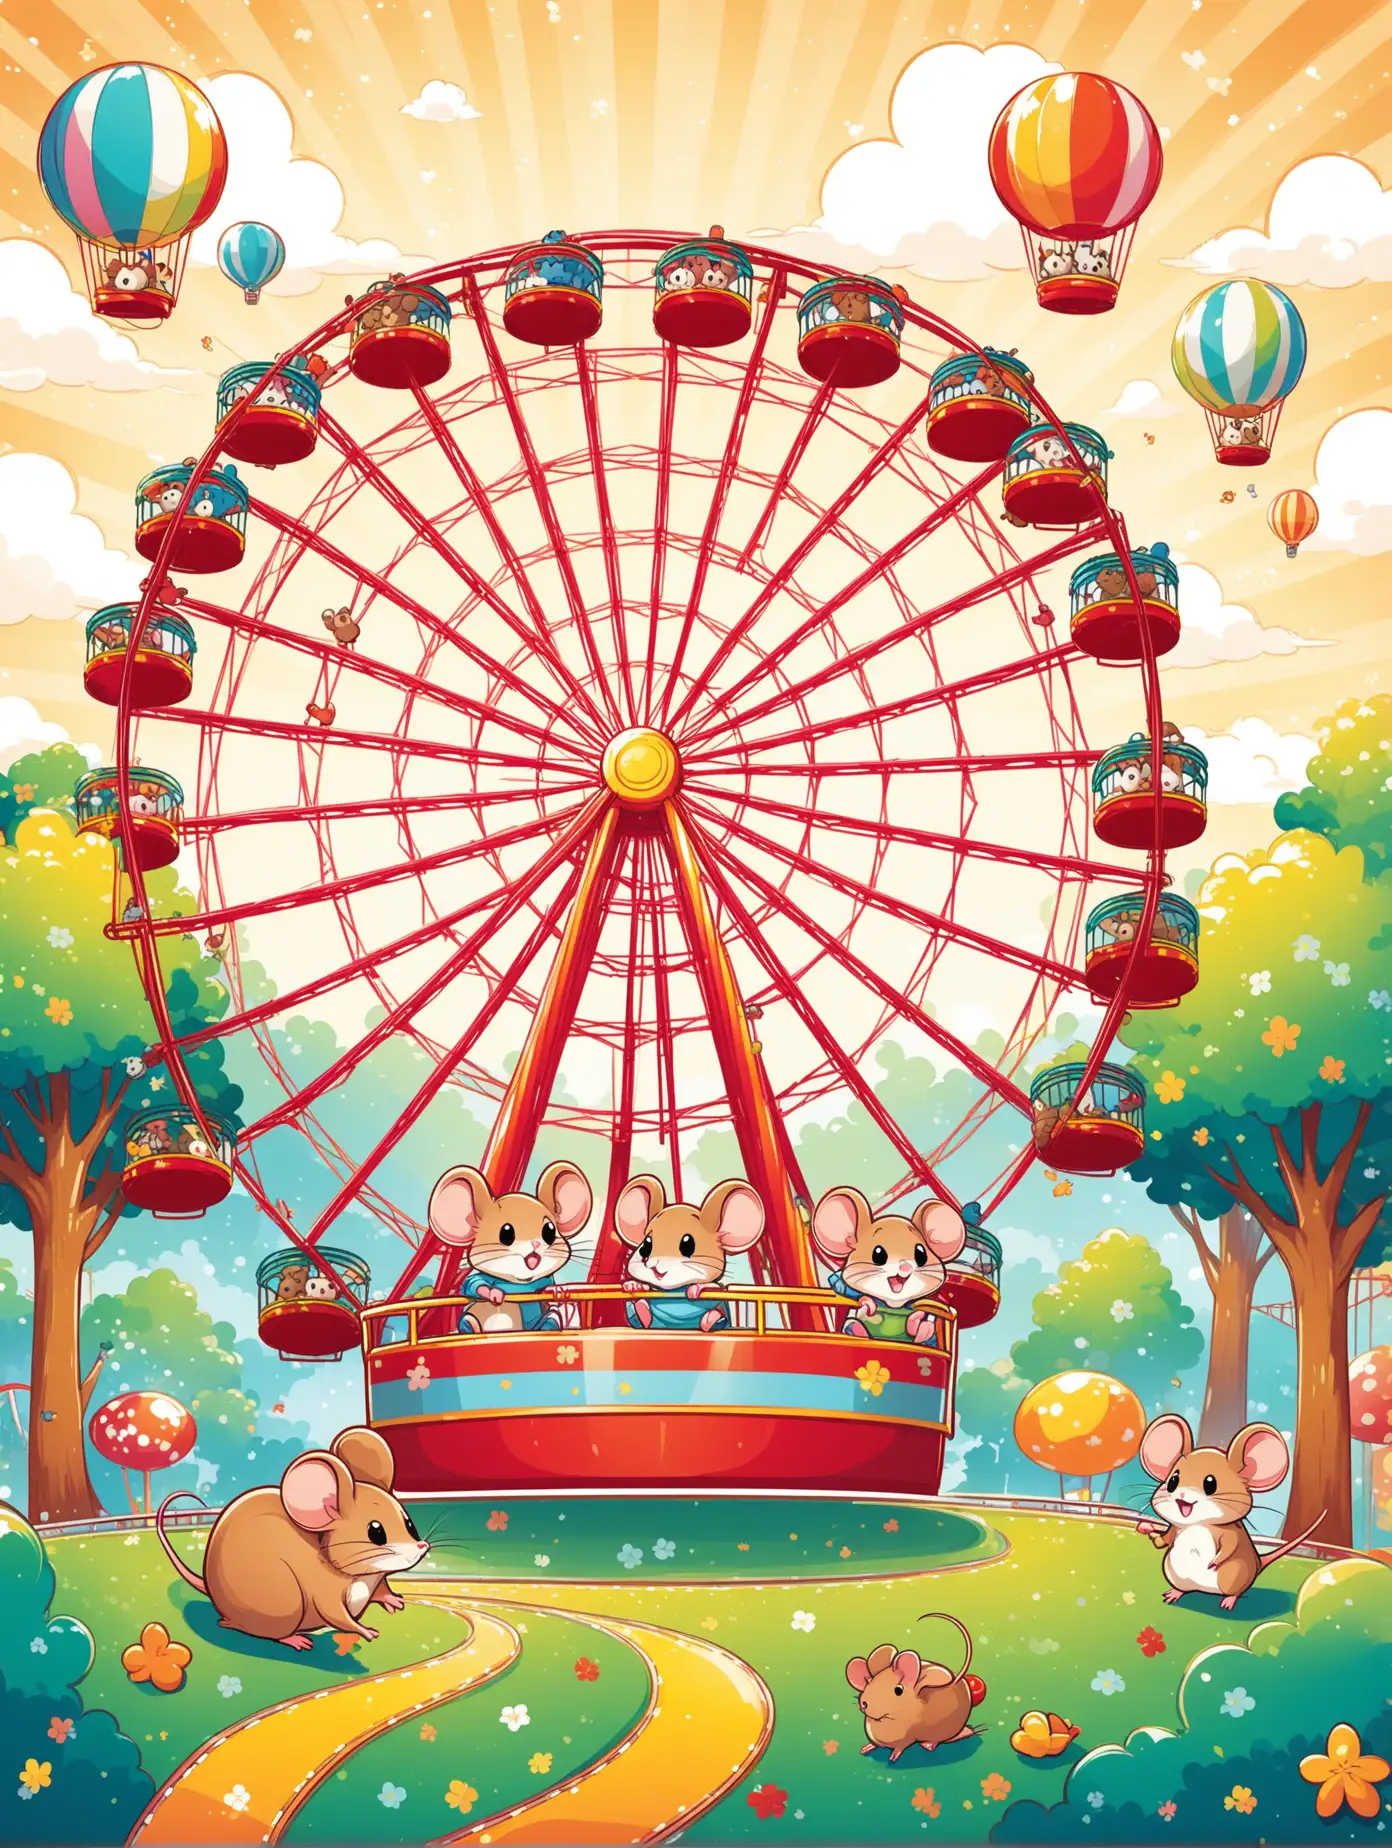 Background papers of an illustration of a playful little mouse at the fun fare, having a ride on the Ferris wheel with his friends, the other small forrest animals 